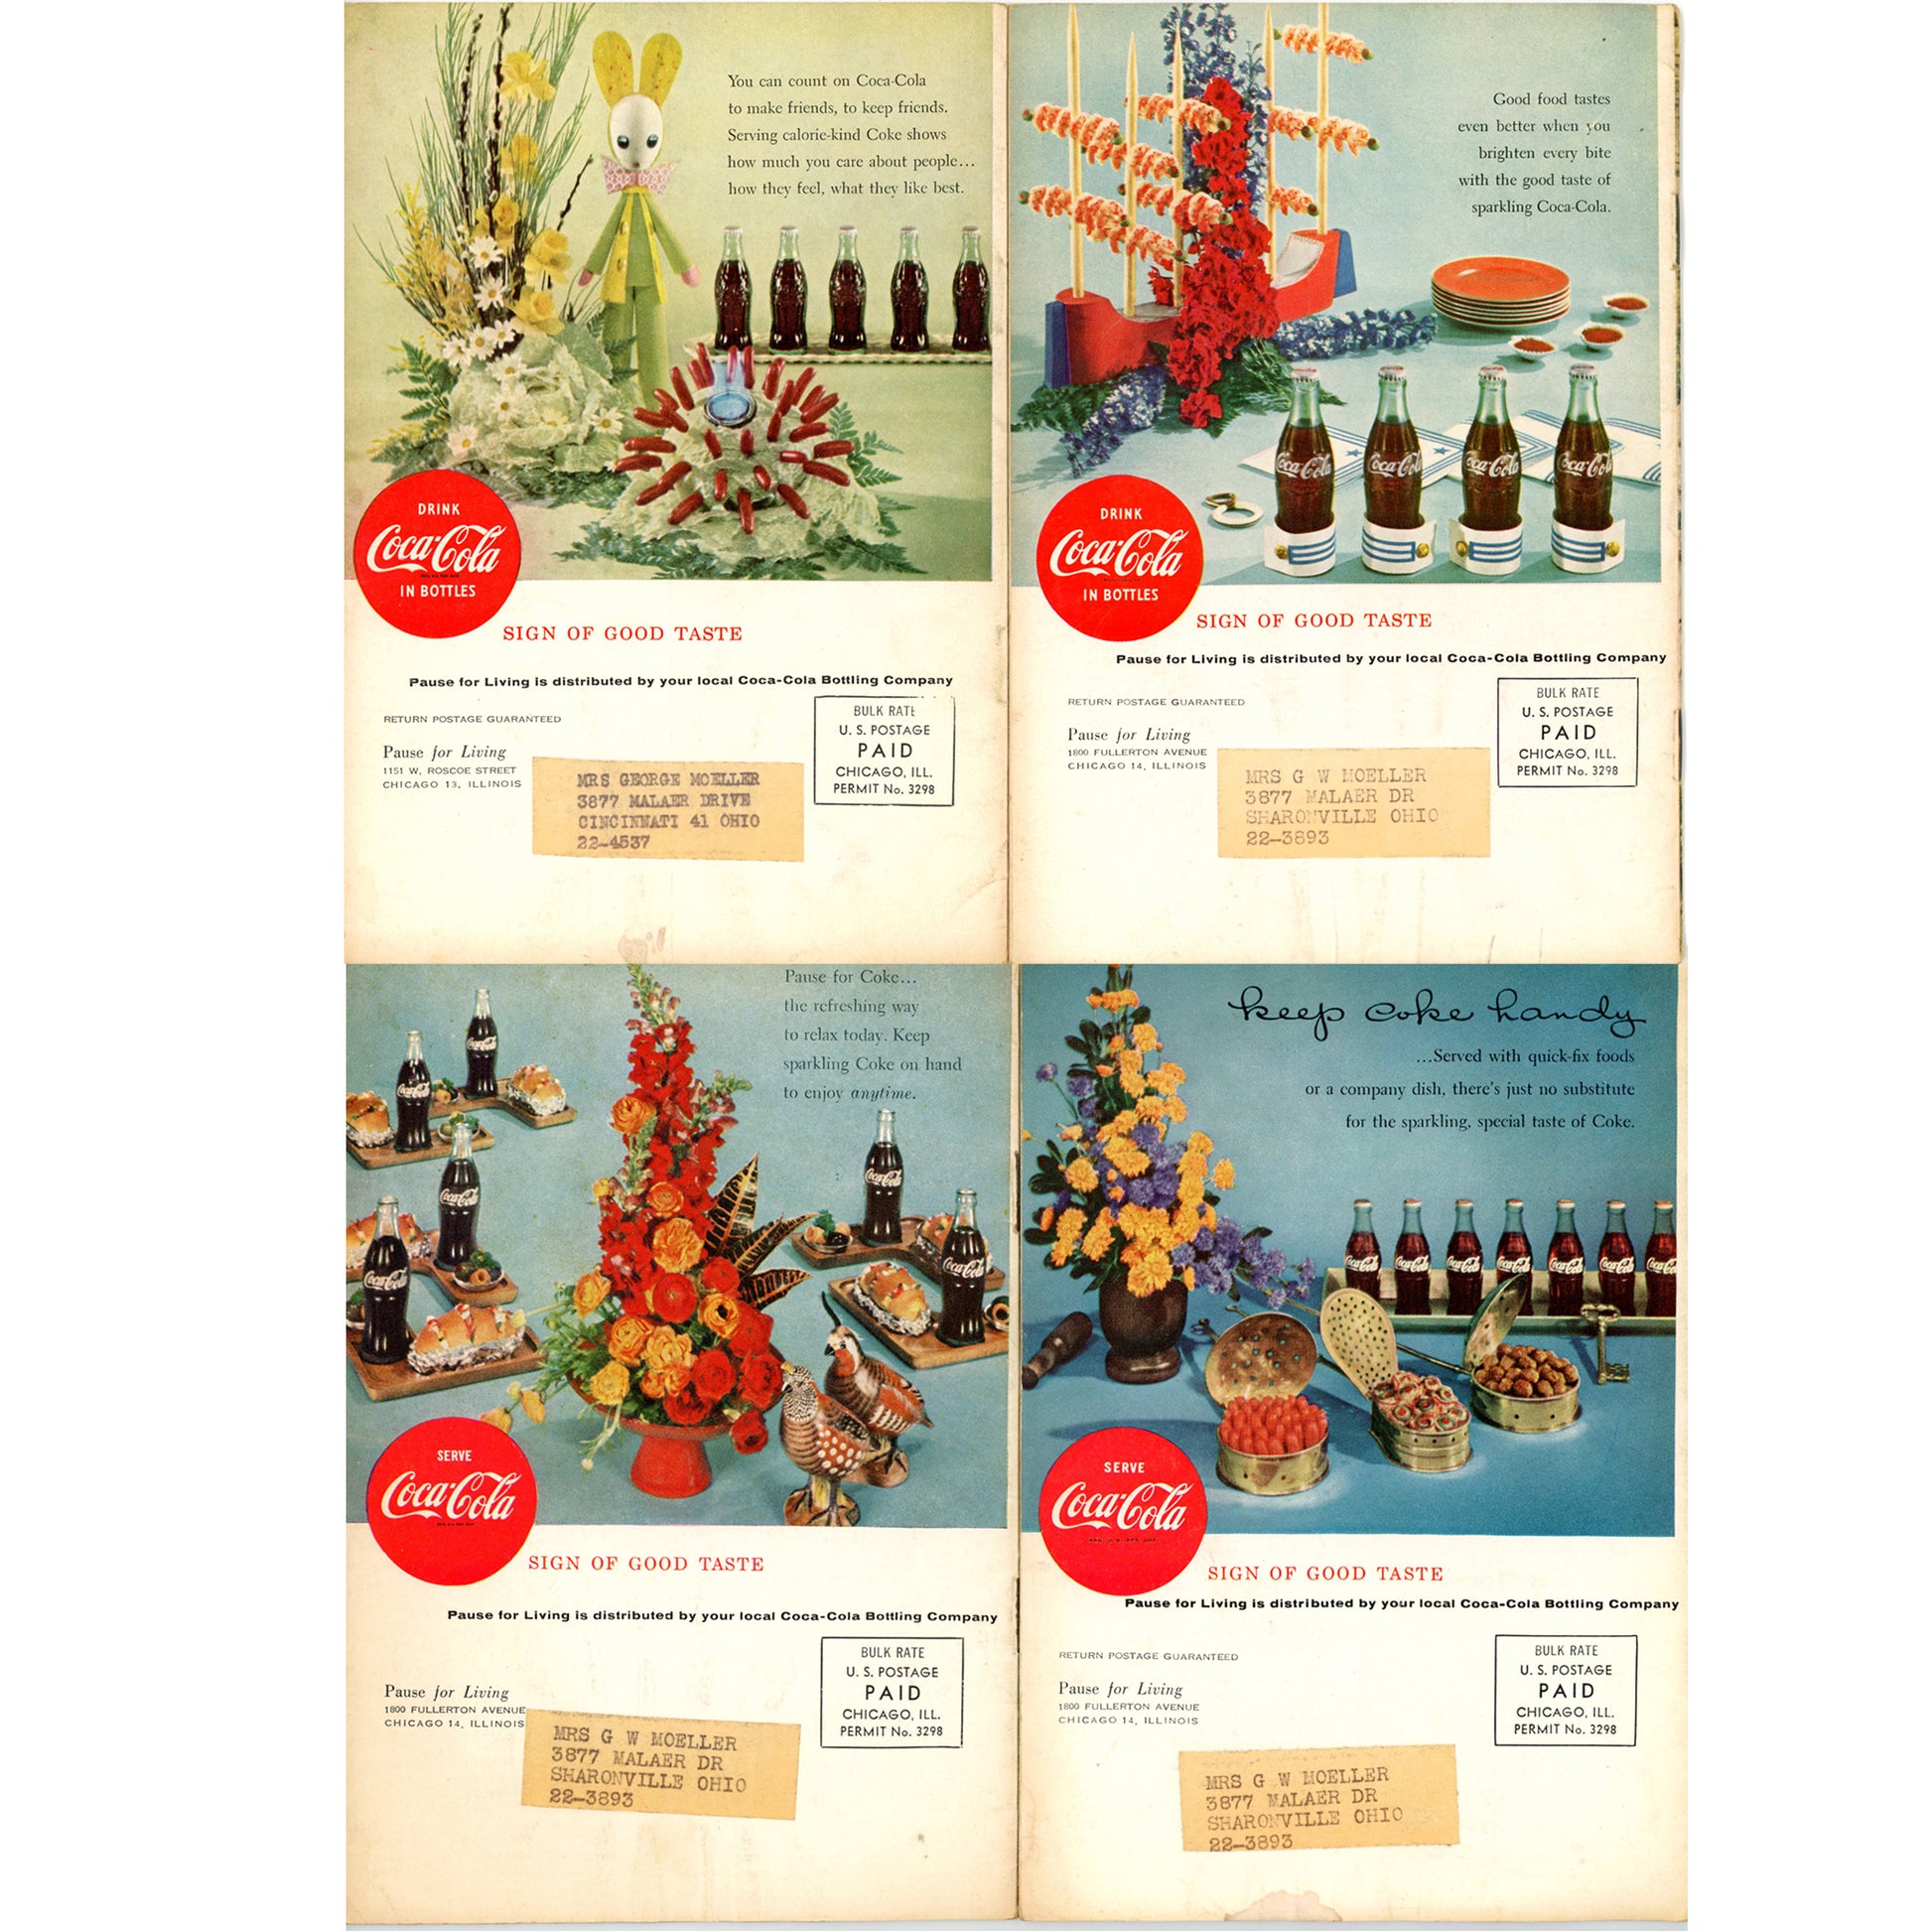 PAUSE FOR LIVING Seasonal Entertaining Booklets by Coca Cola Full Set from 1958